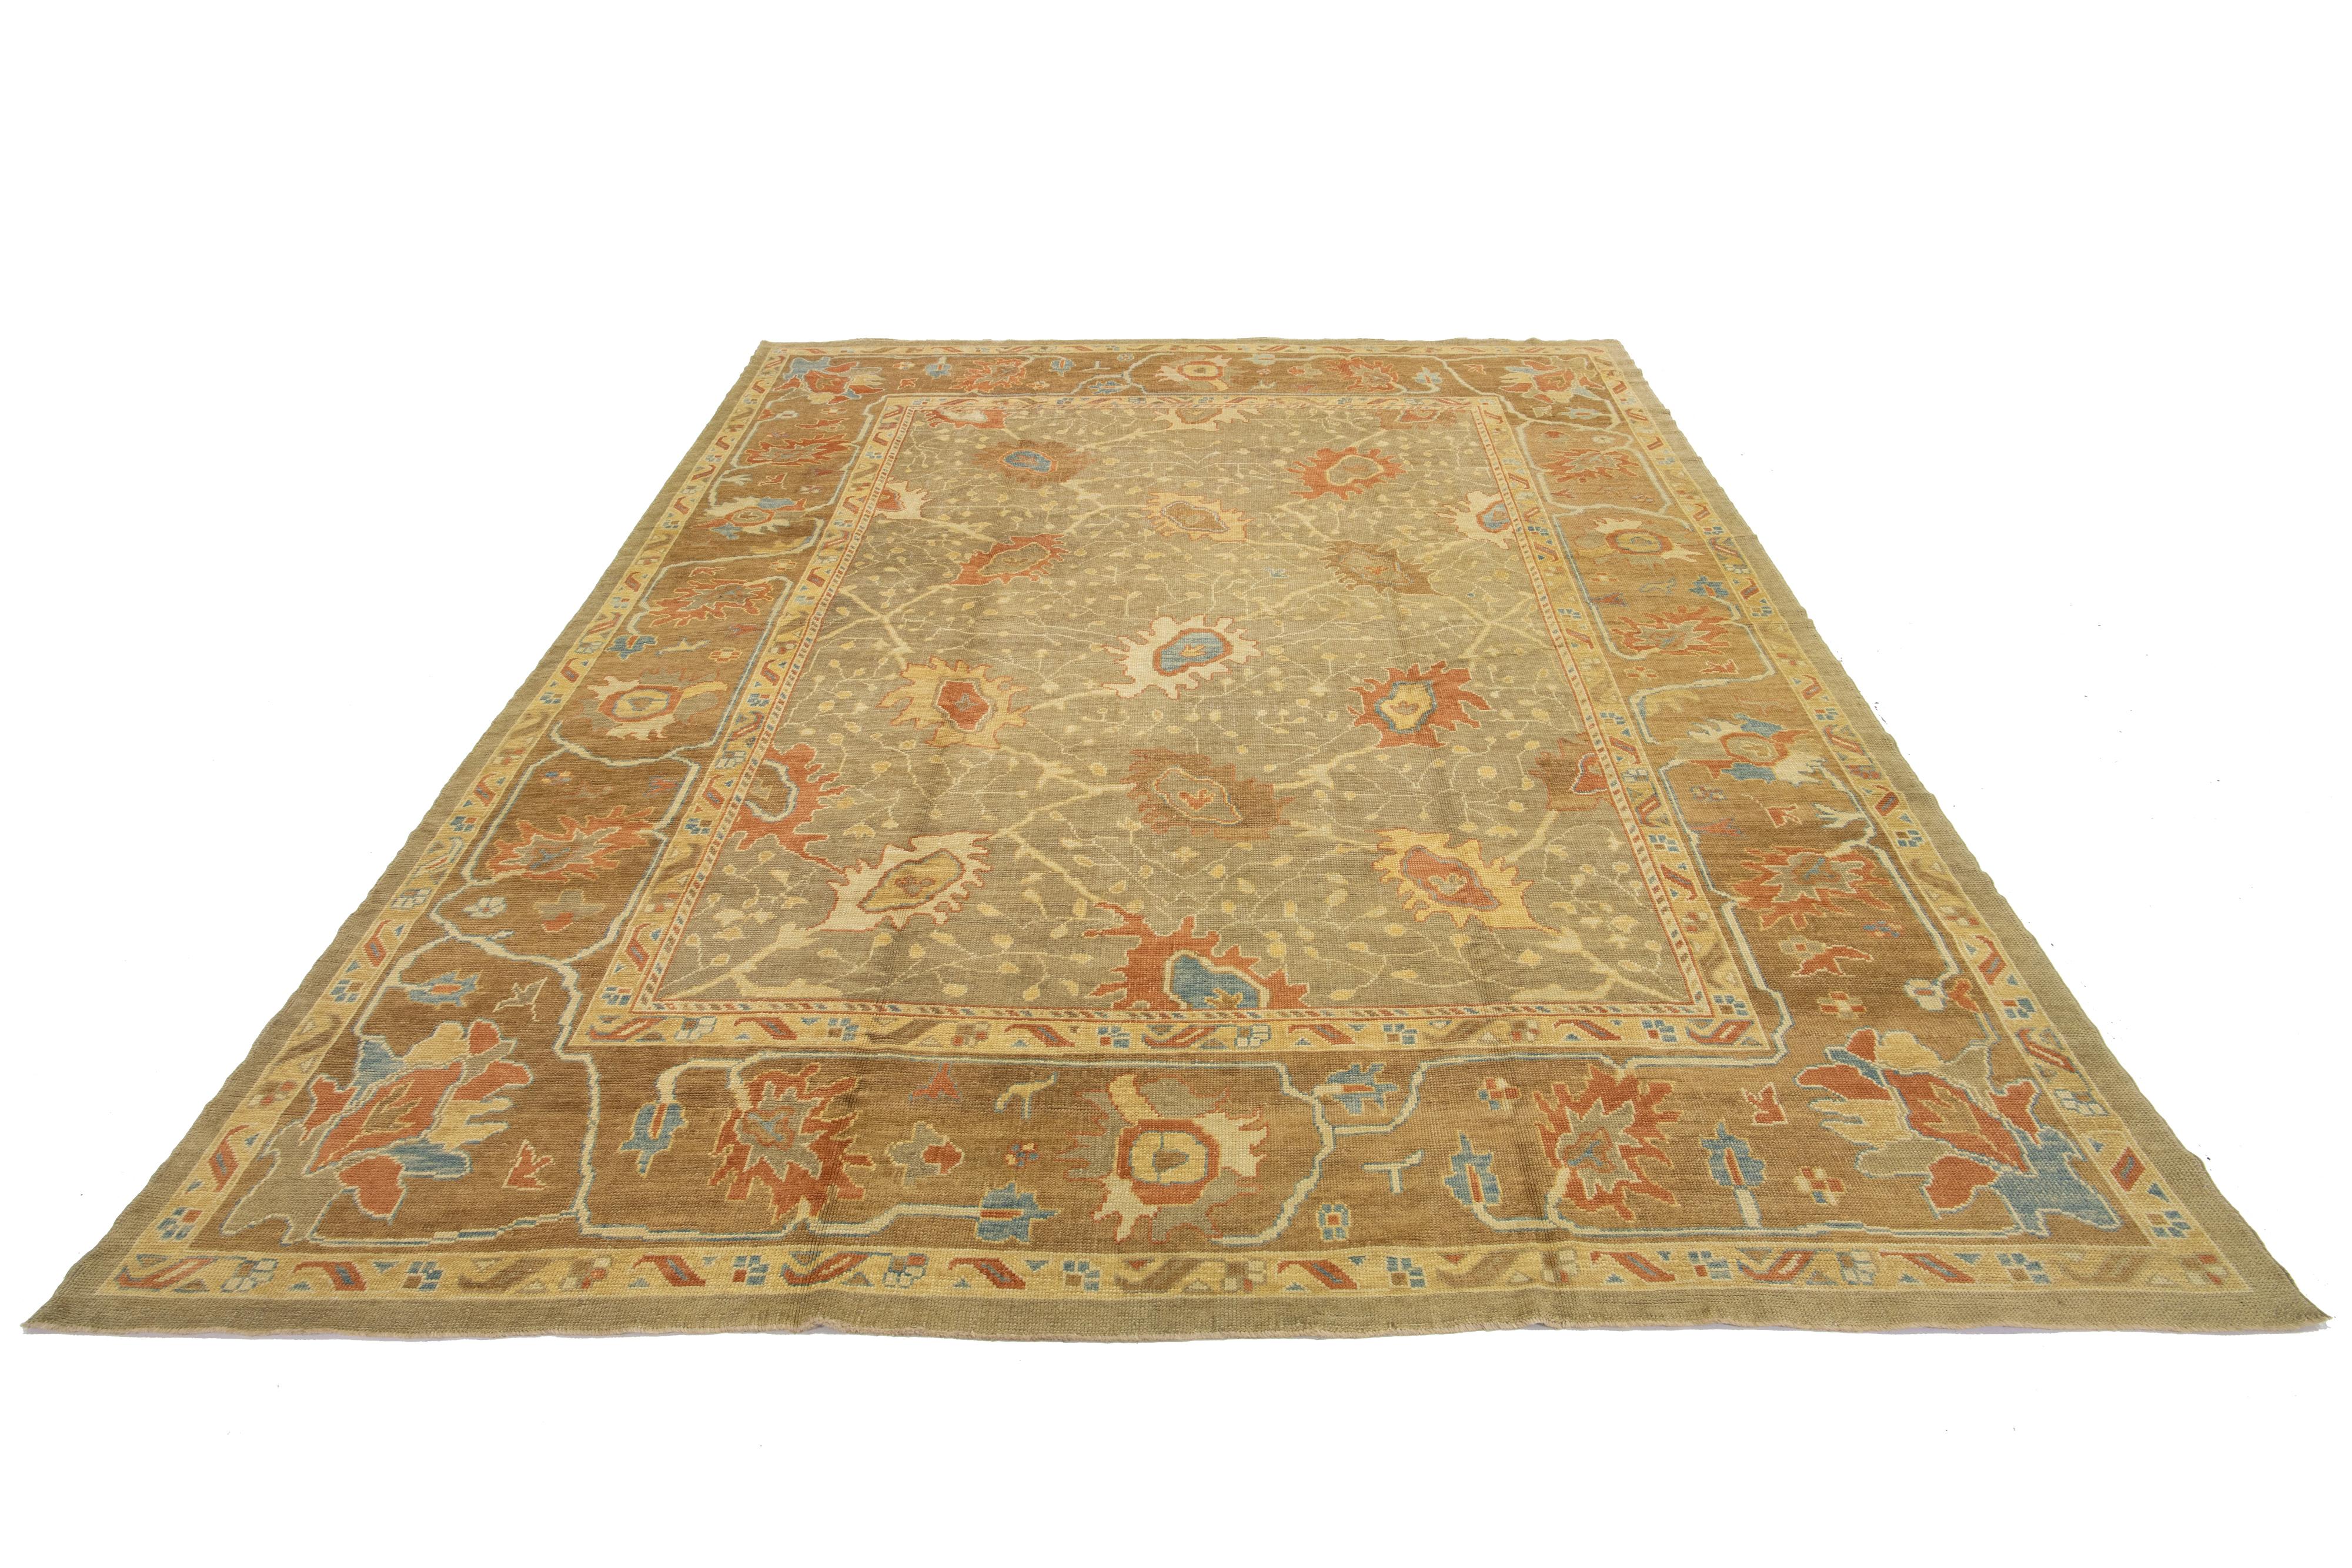 This is a hand-knotted rug showcasing a floral design. The background is tan with brown borders and is further accentuated with multi-color accents.

This rug measures 11'4